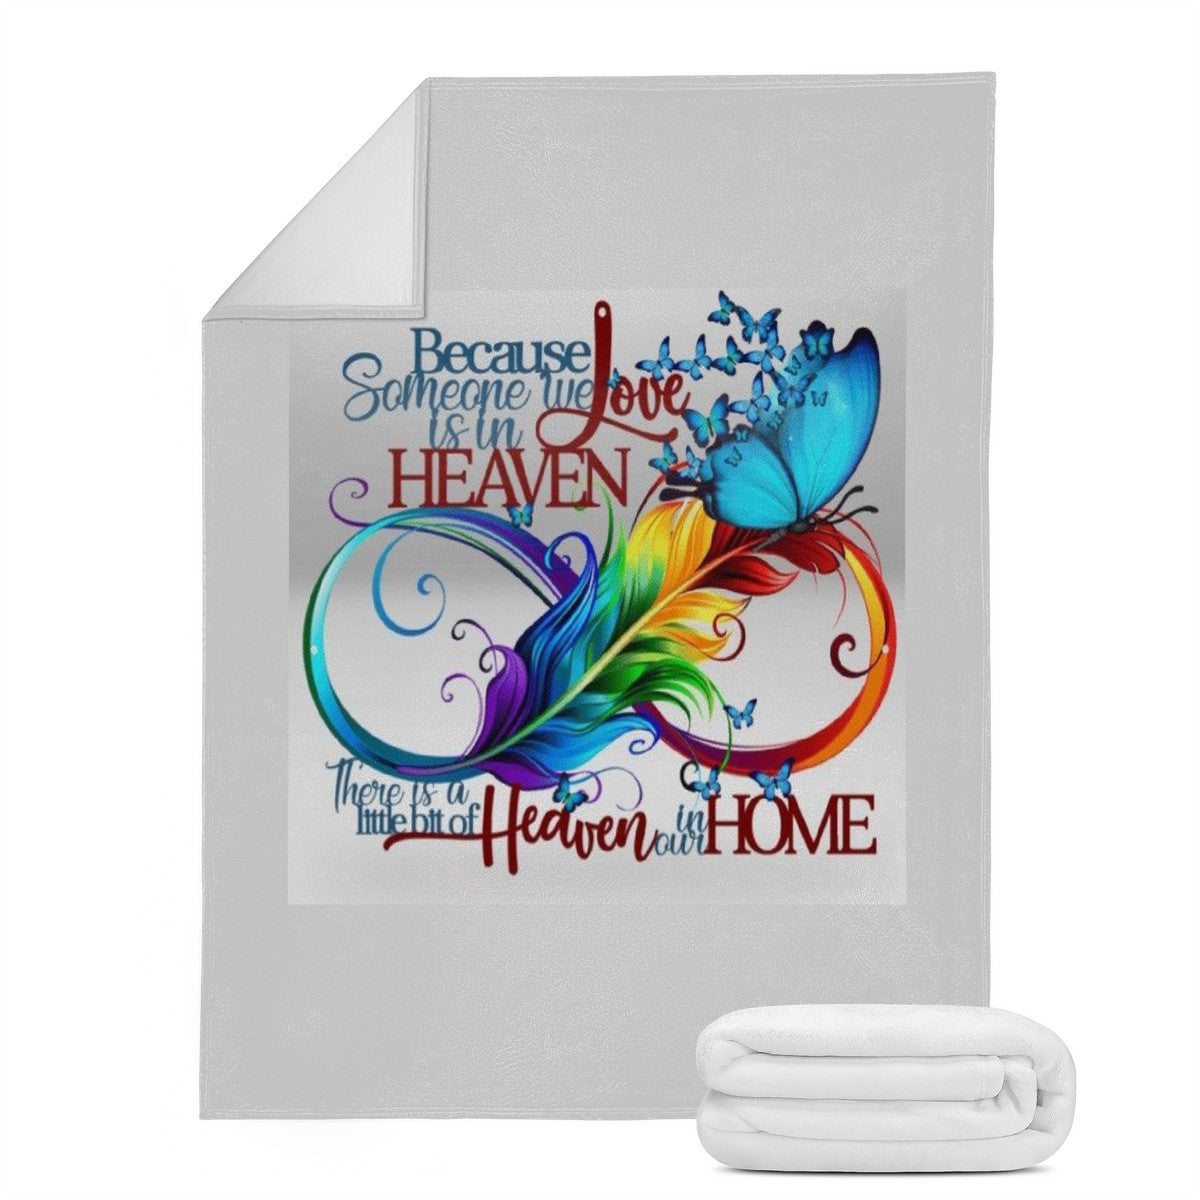 Embrace Heavenly Memories with Our &quot;Because someone we love is in Heaven&quot; Blanket Home-clothes-jewelry